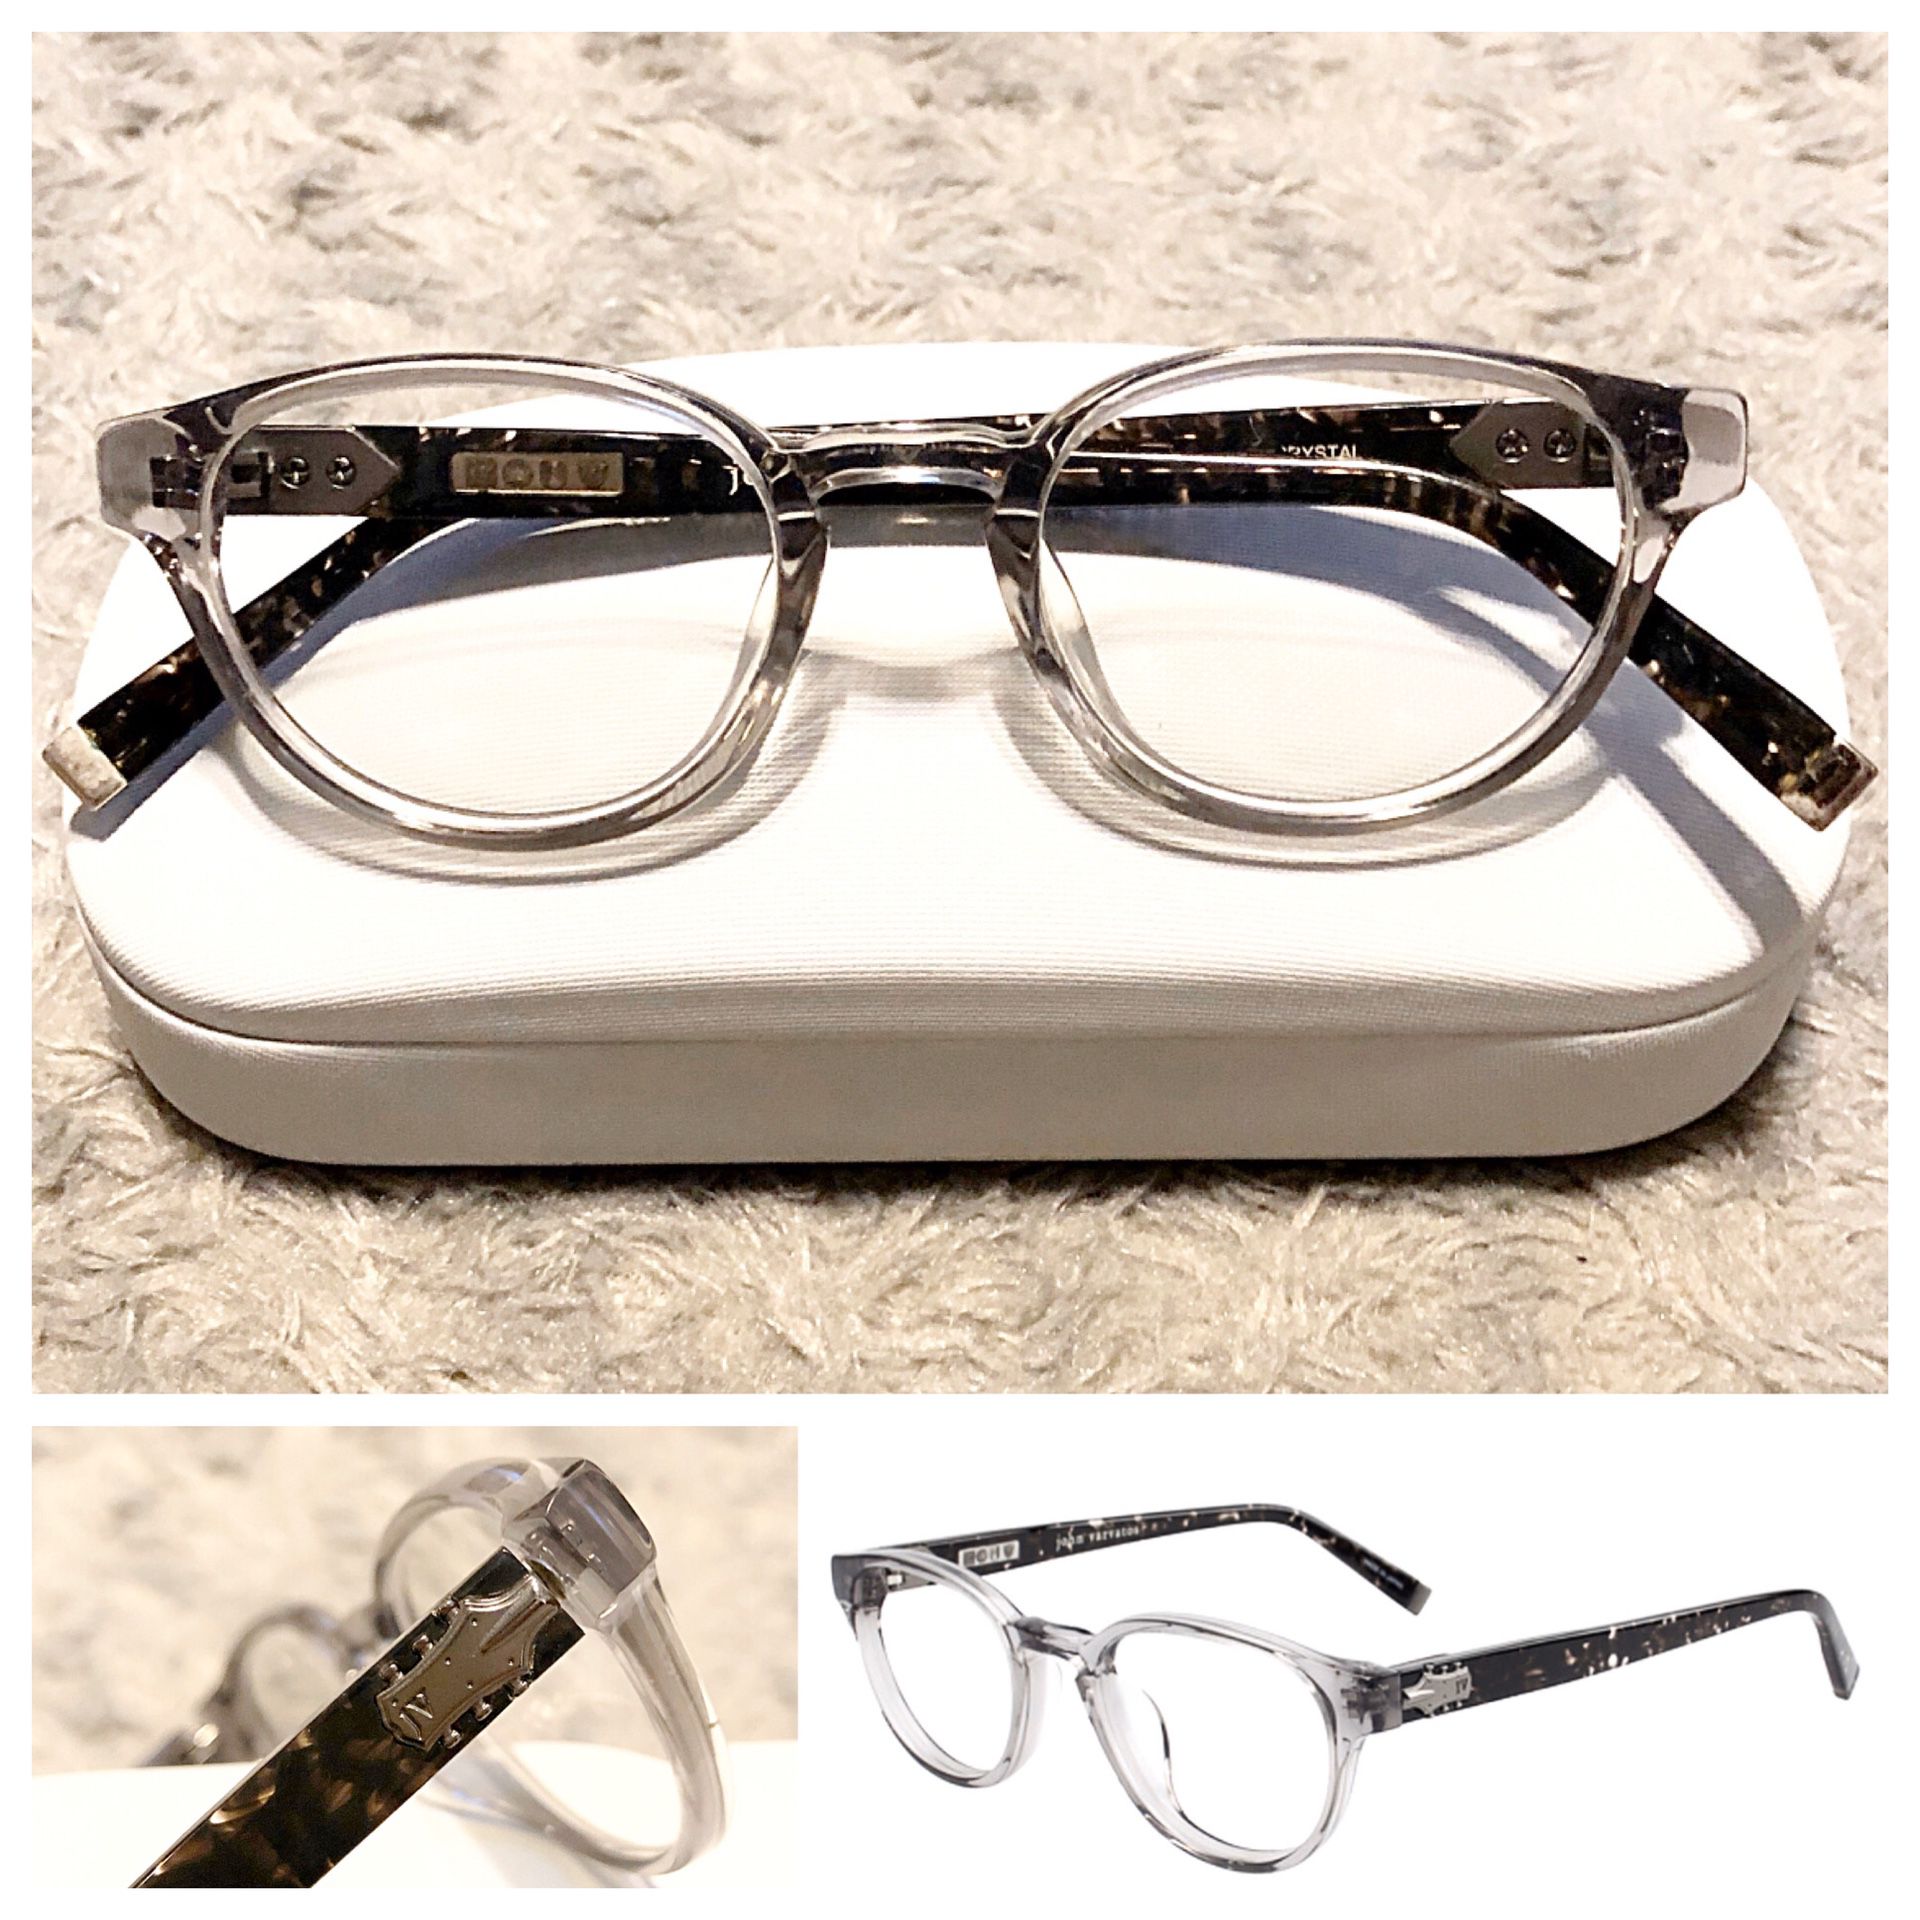 Men’s John Varvatos Crystal glasses paid $320 Excellent condition! Style# V353 48mm Some letters are missing inside frame from wear but still legible